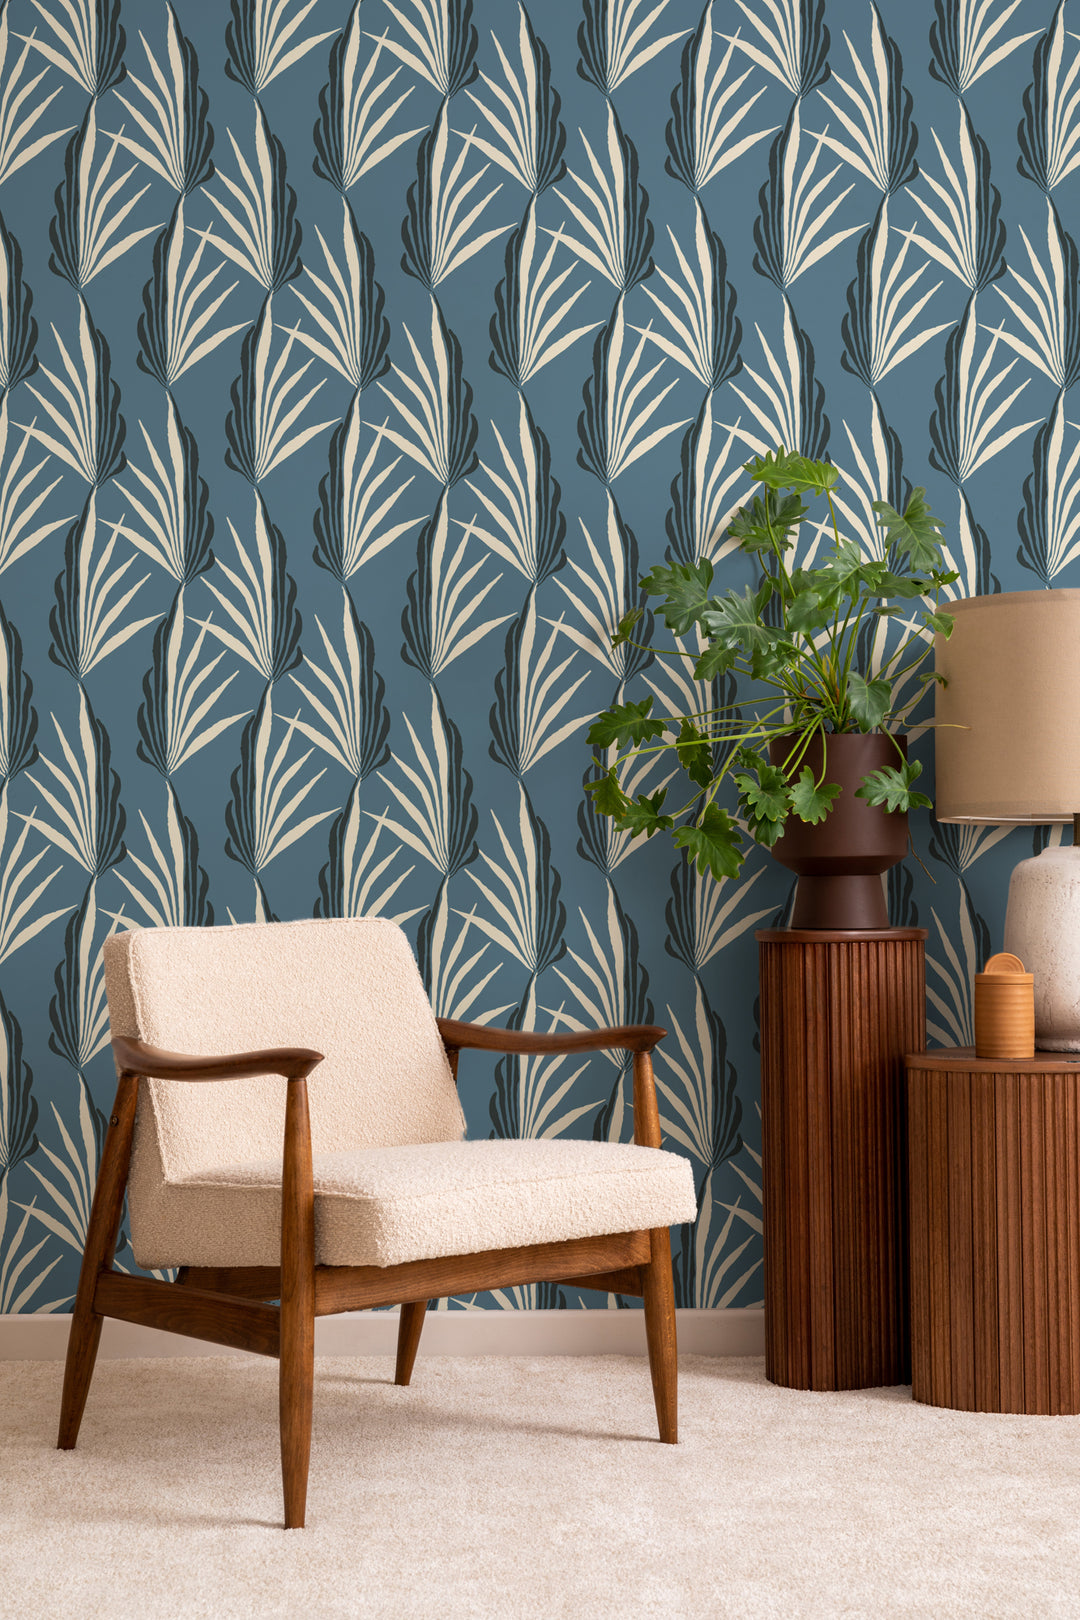 Areca Palm - Early Morning Blue Wallpaper